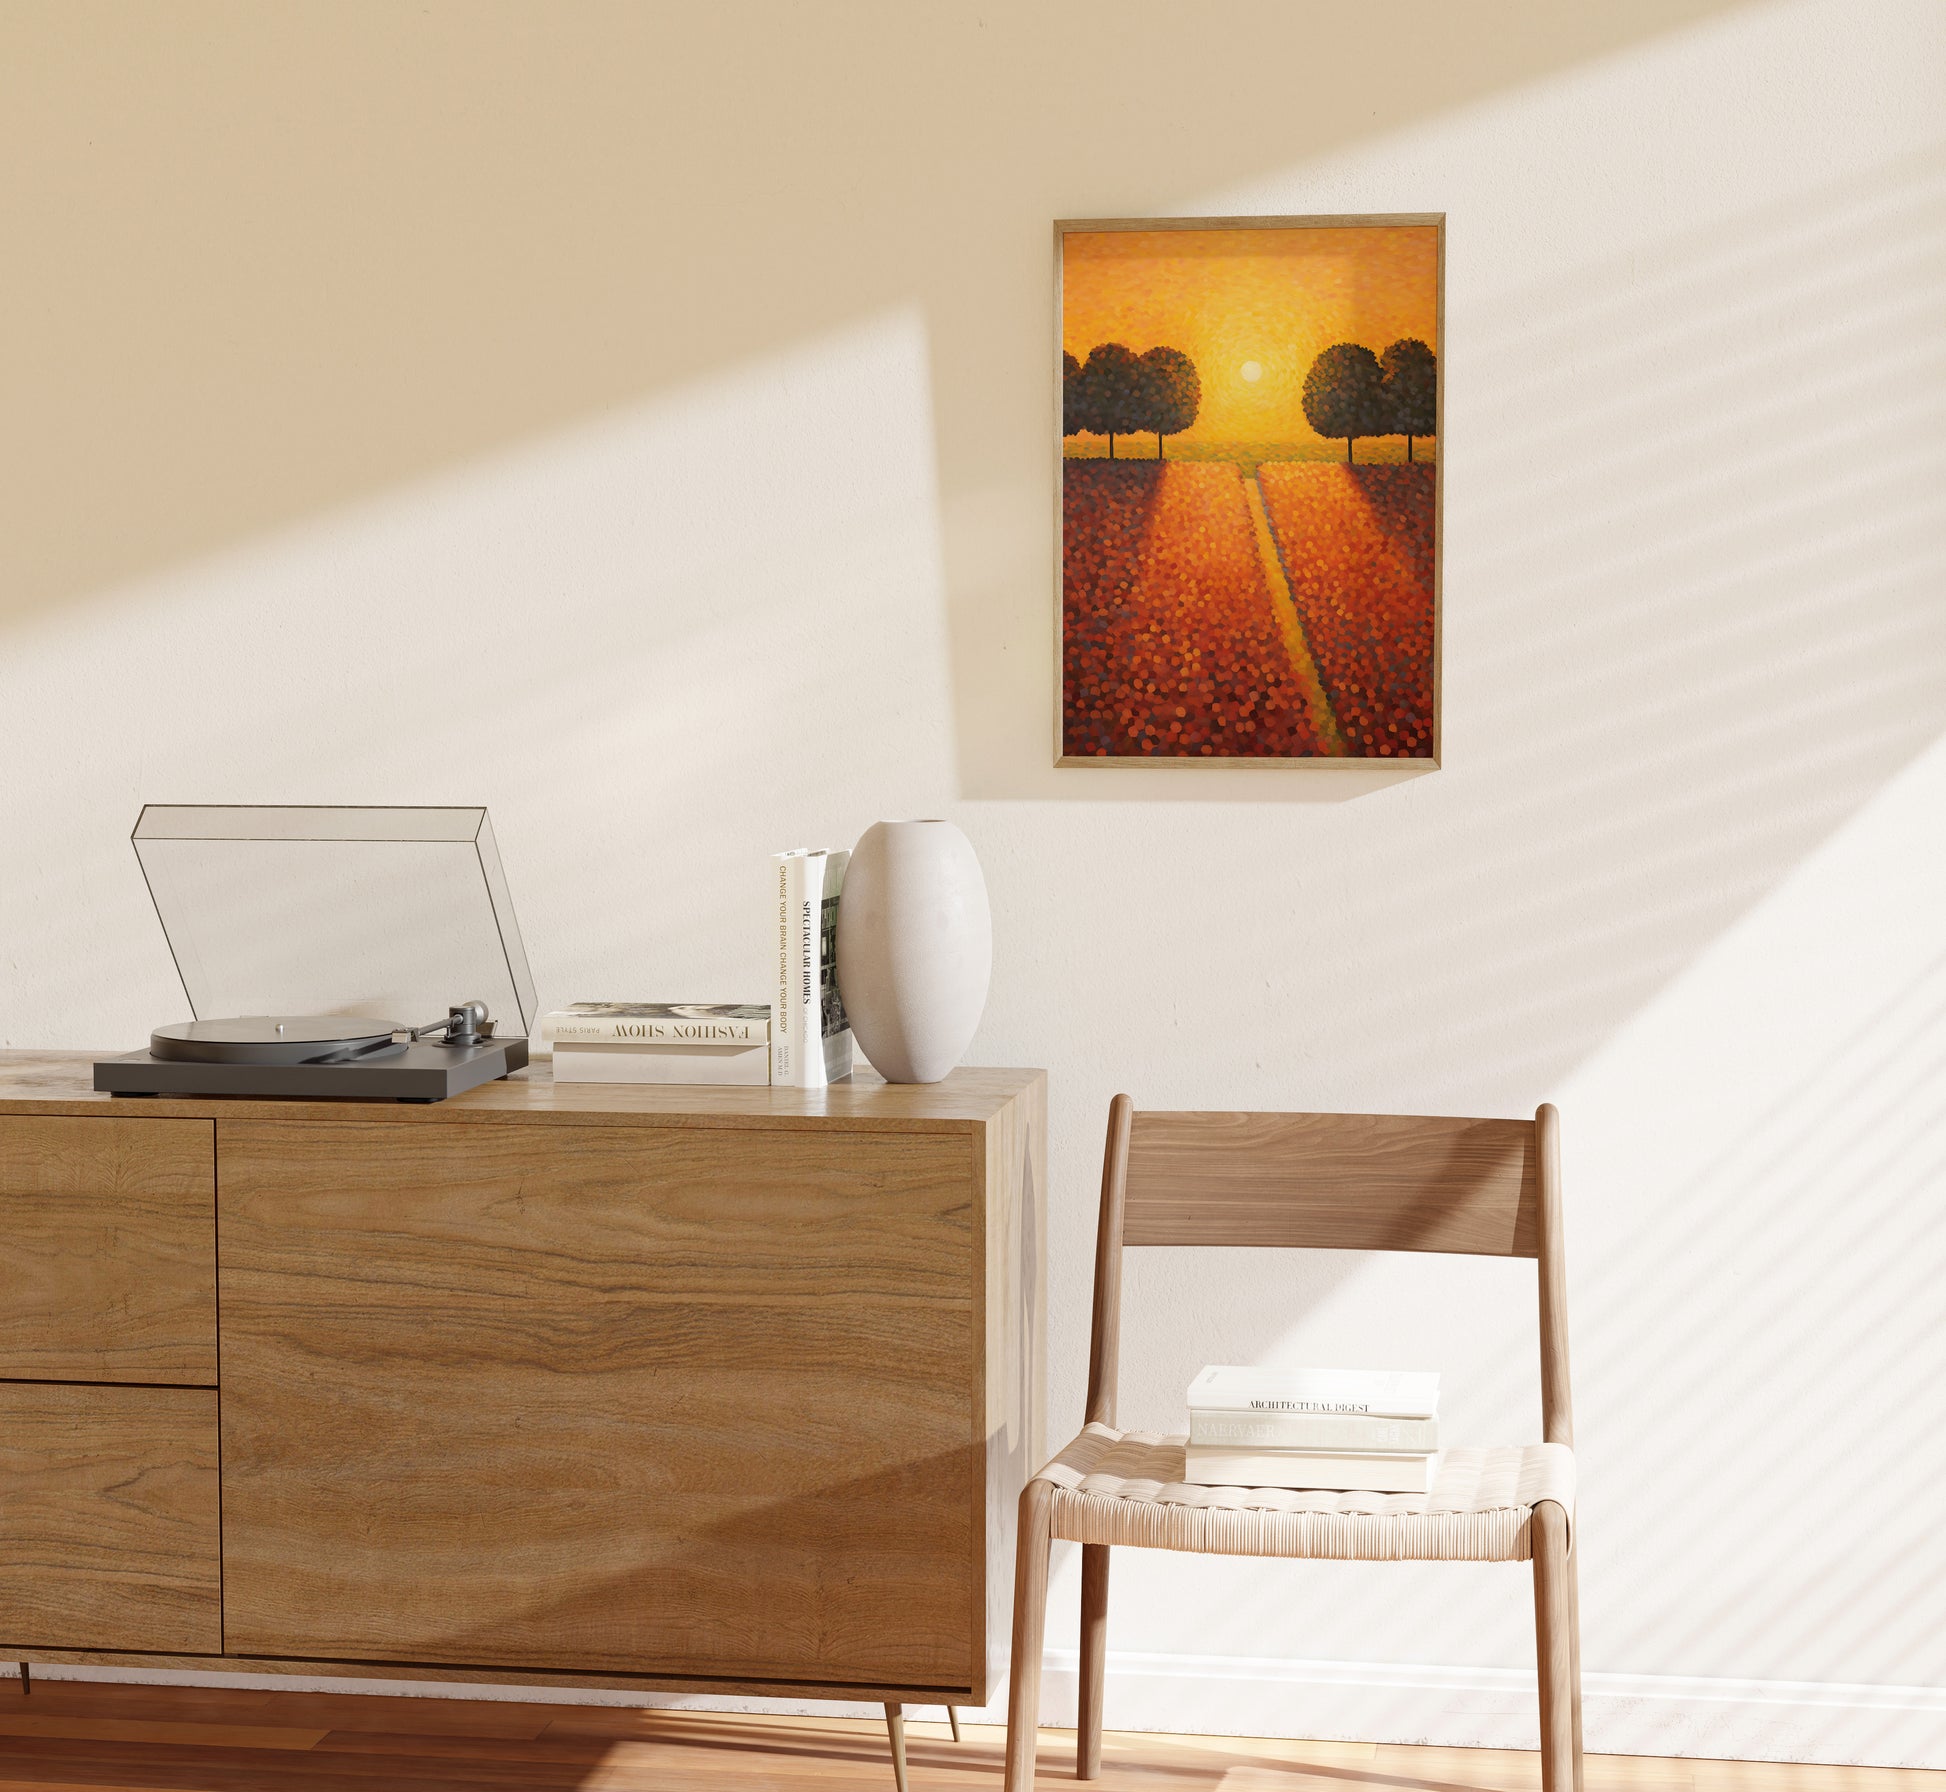 Modern room with wooden furniture and a framed painting of a sunset above.